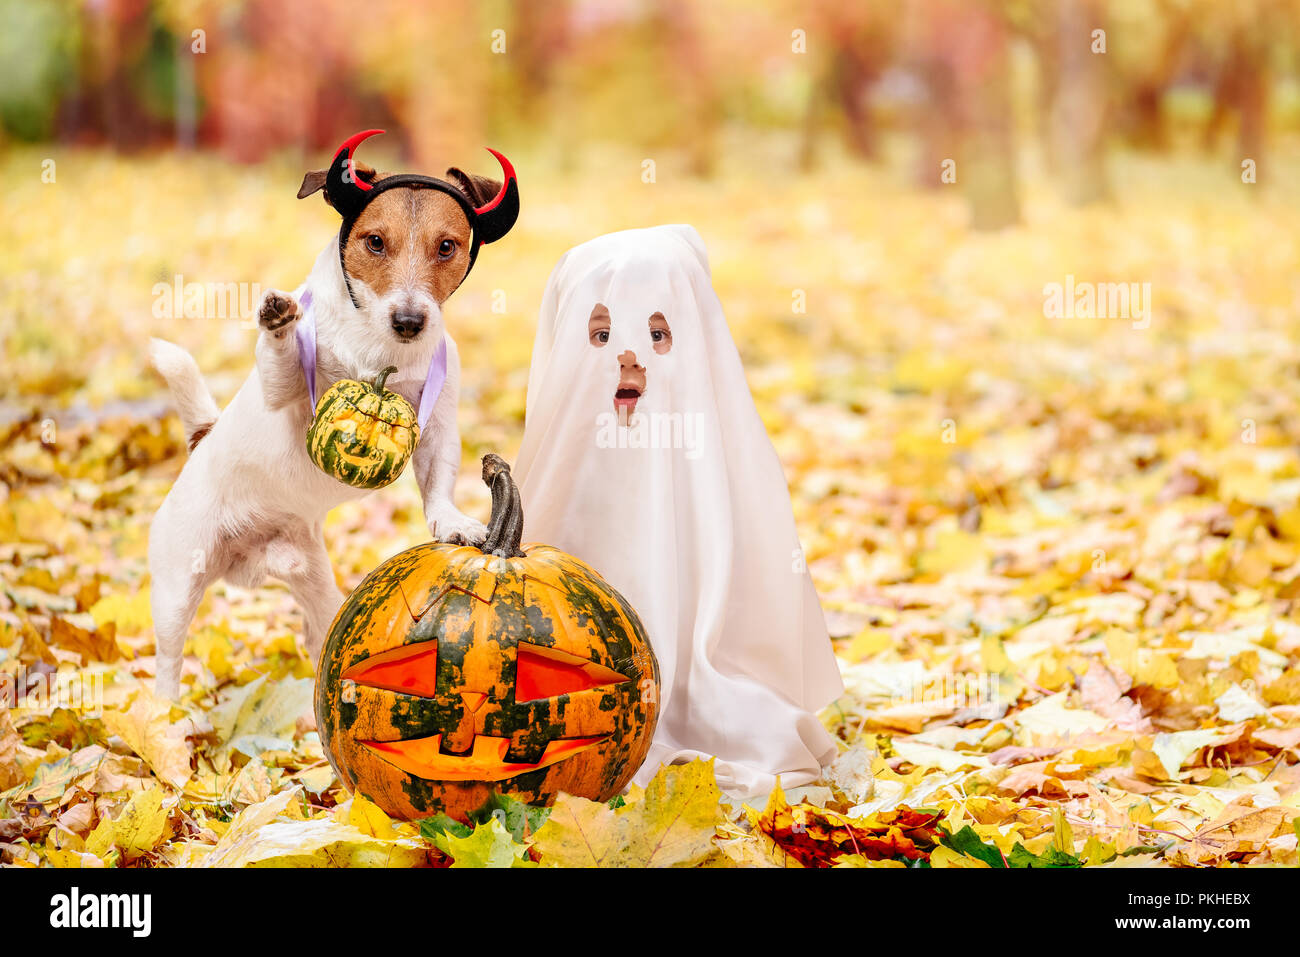 Kid and dog dressed in Halloween costumes with Jack o' lantern pumpkins Stock Photo